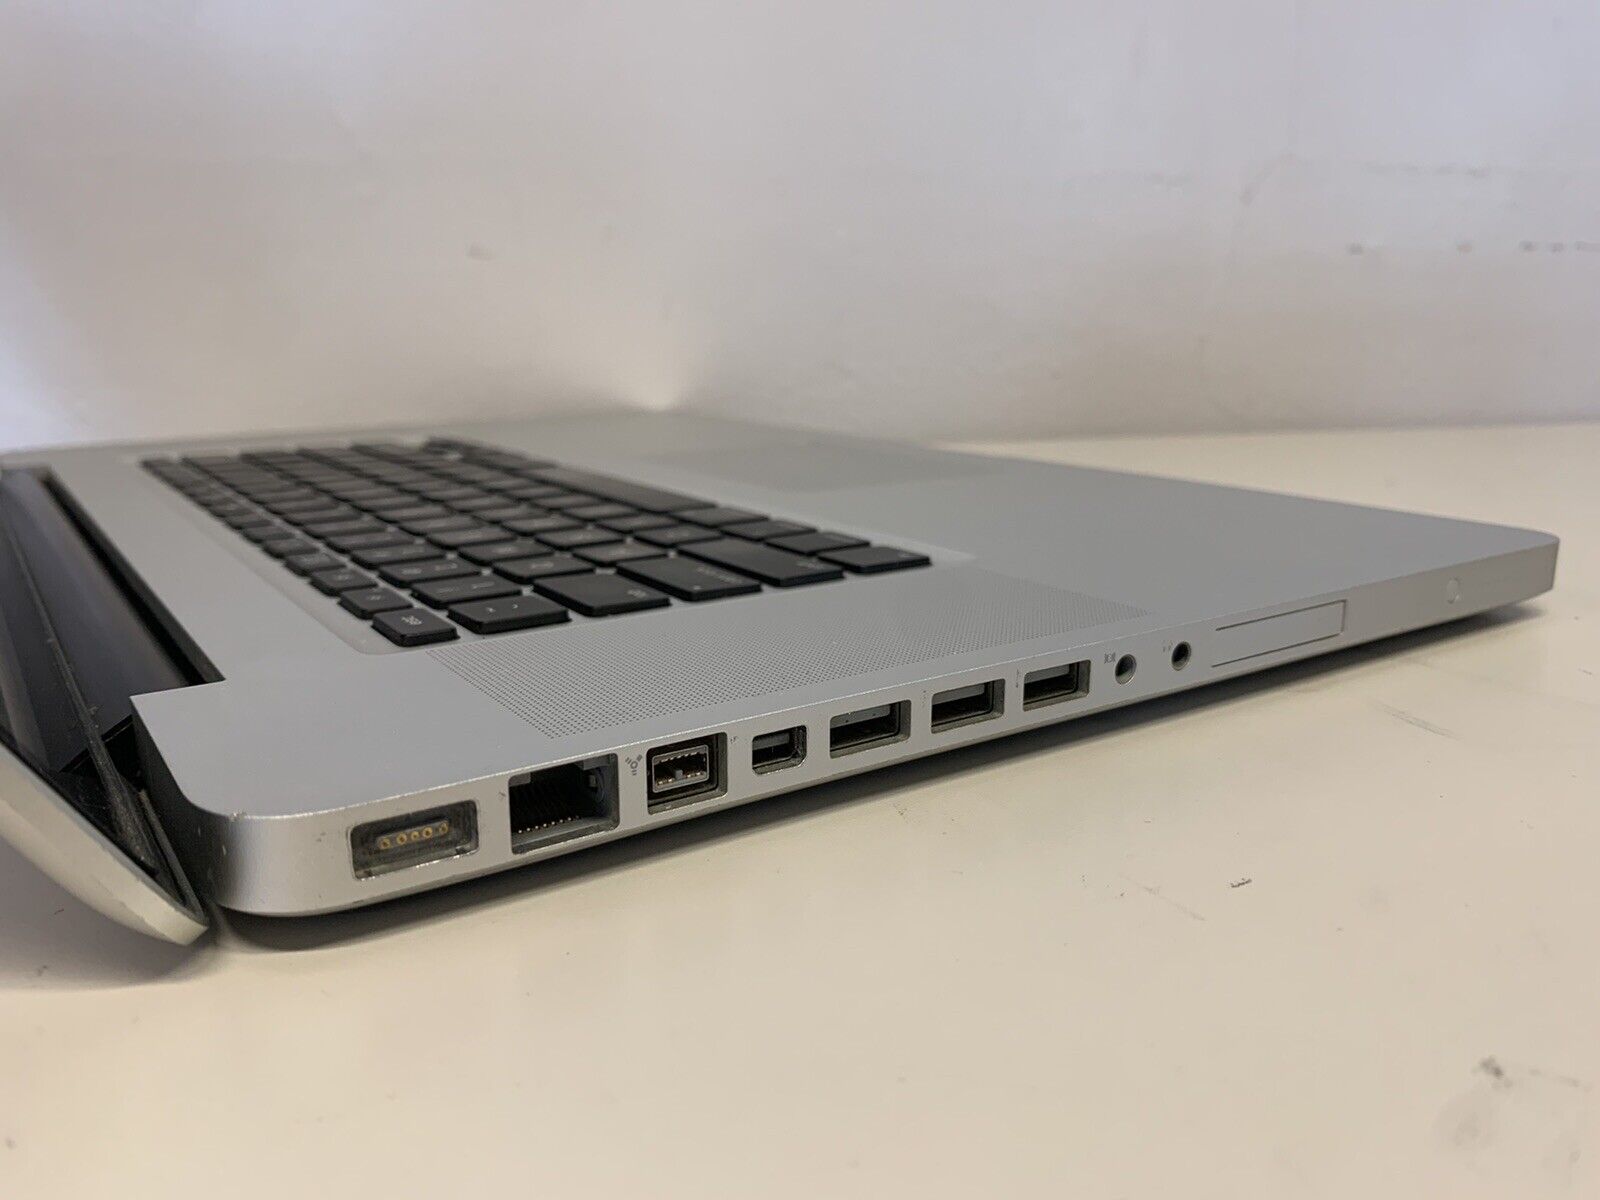 Apple Macbook Pro 17-Inch Core i5 2.53Ghz Mid-2010 Works Great 